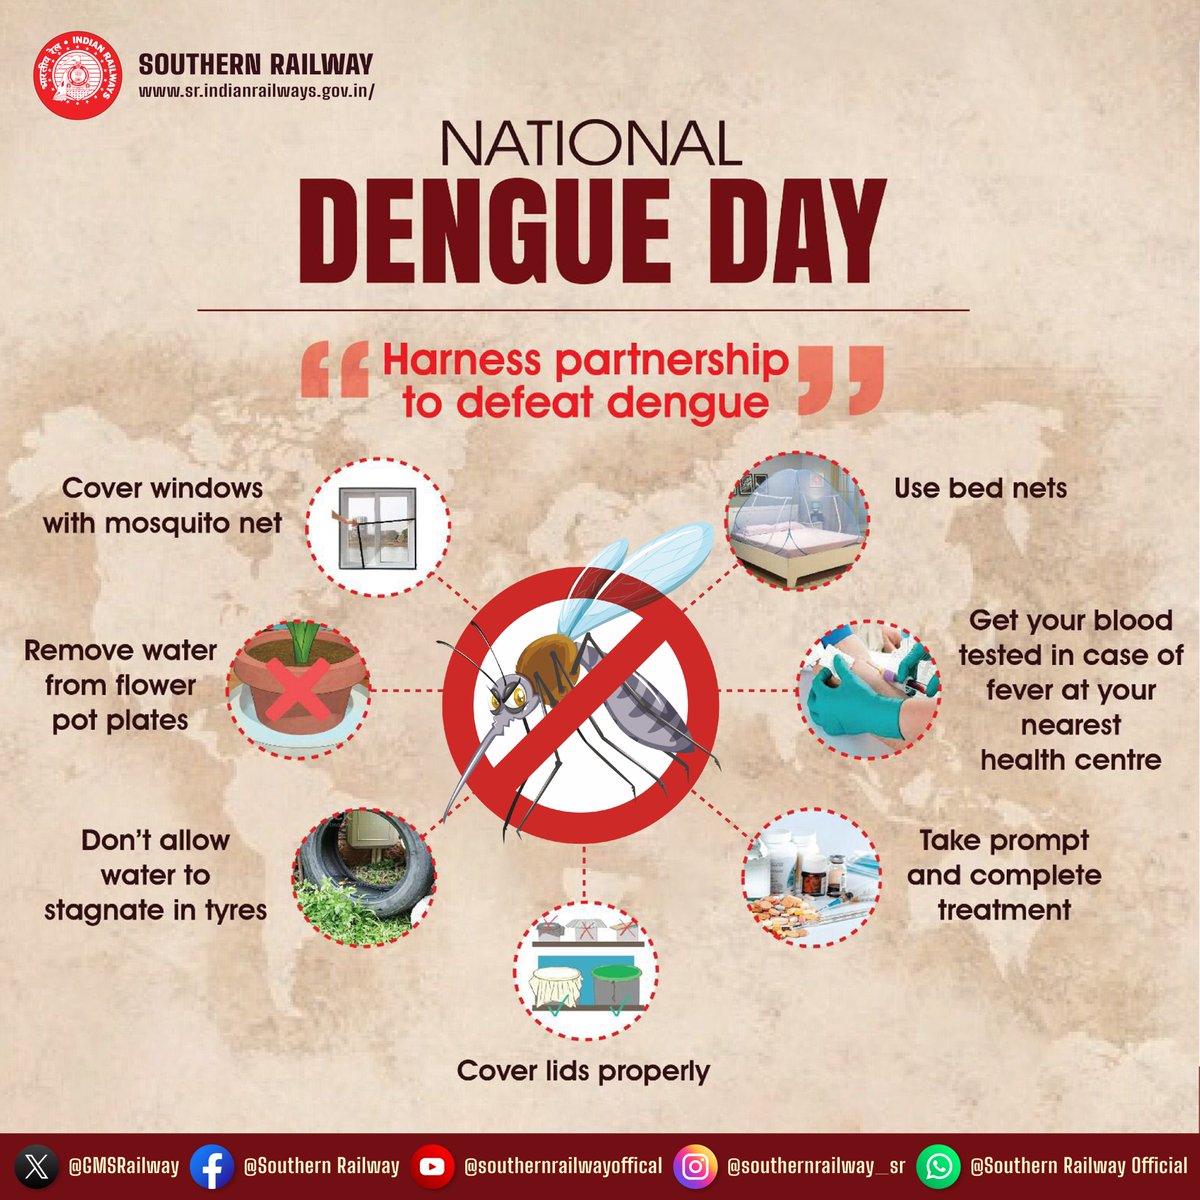 Fight the bite! #NationalDengueDay

Wear long sleeves & pants (light colors!), stay indoors at dawn & dusk, and use repellents & nets. Empty stagnant water - it's a breeding ground!  

#DenguePrevention #SouthernRailway  #Awareness #CleanIndia